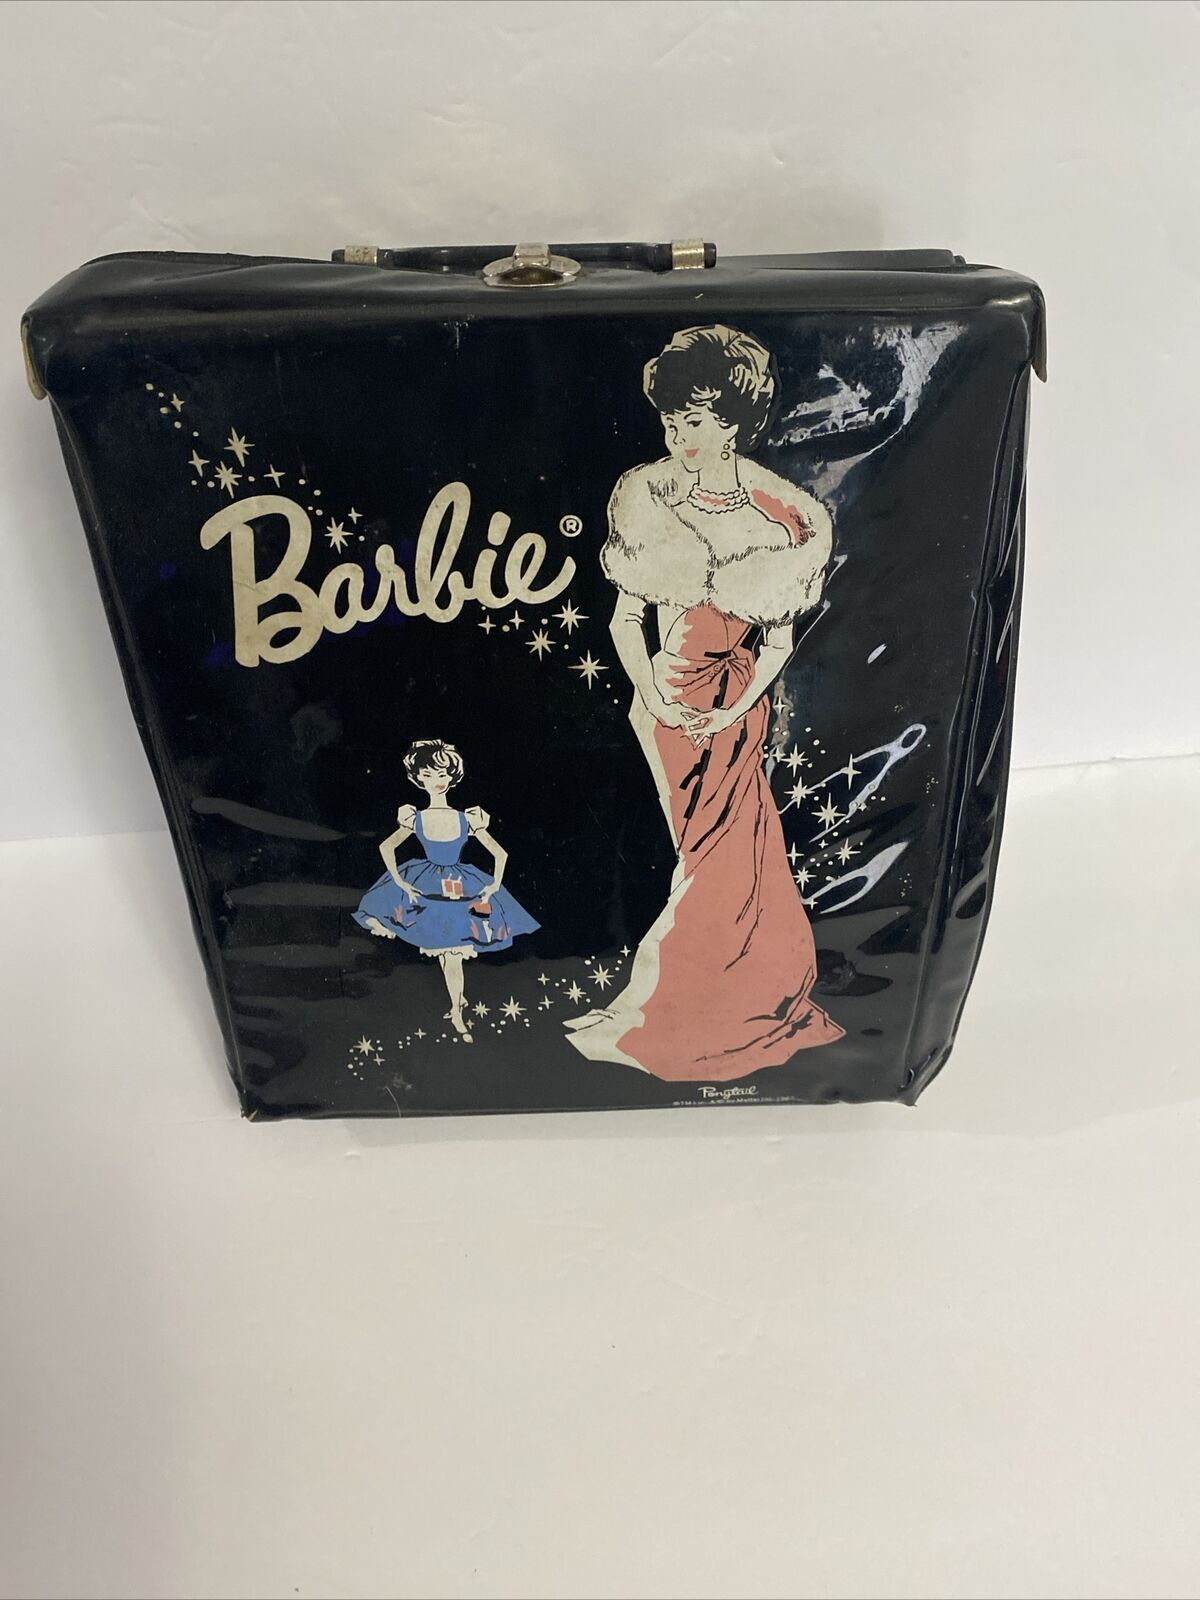 Vintage 1960s Barbie Doll And Case With Over 30 Pieces Of Vintage Clothes.